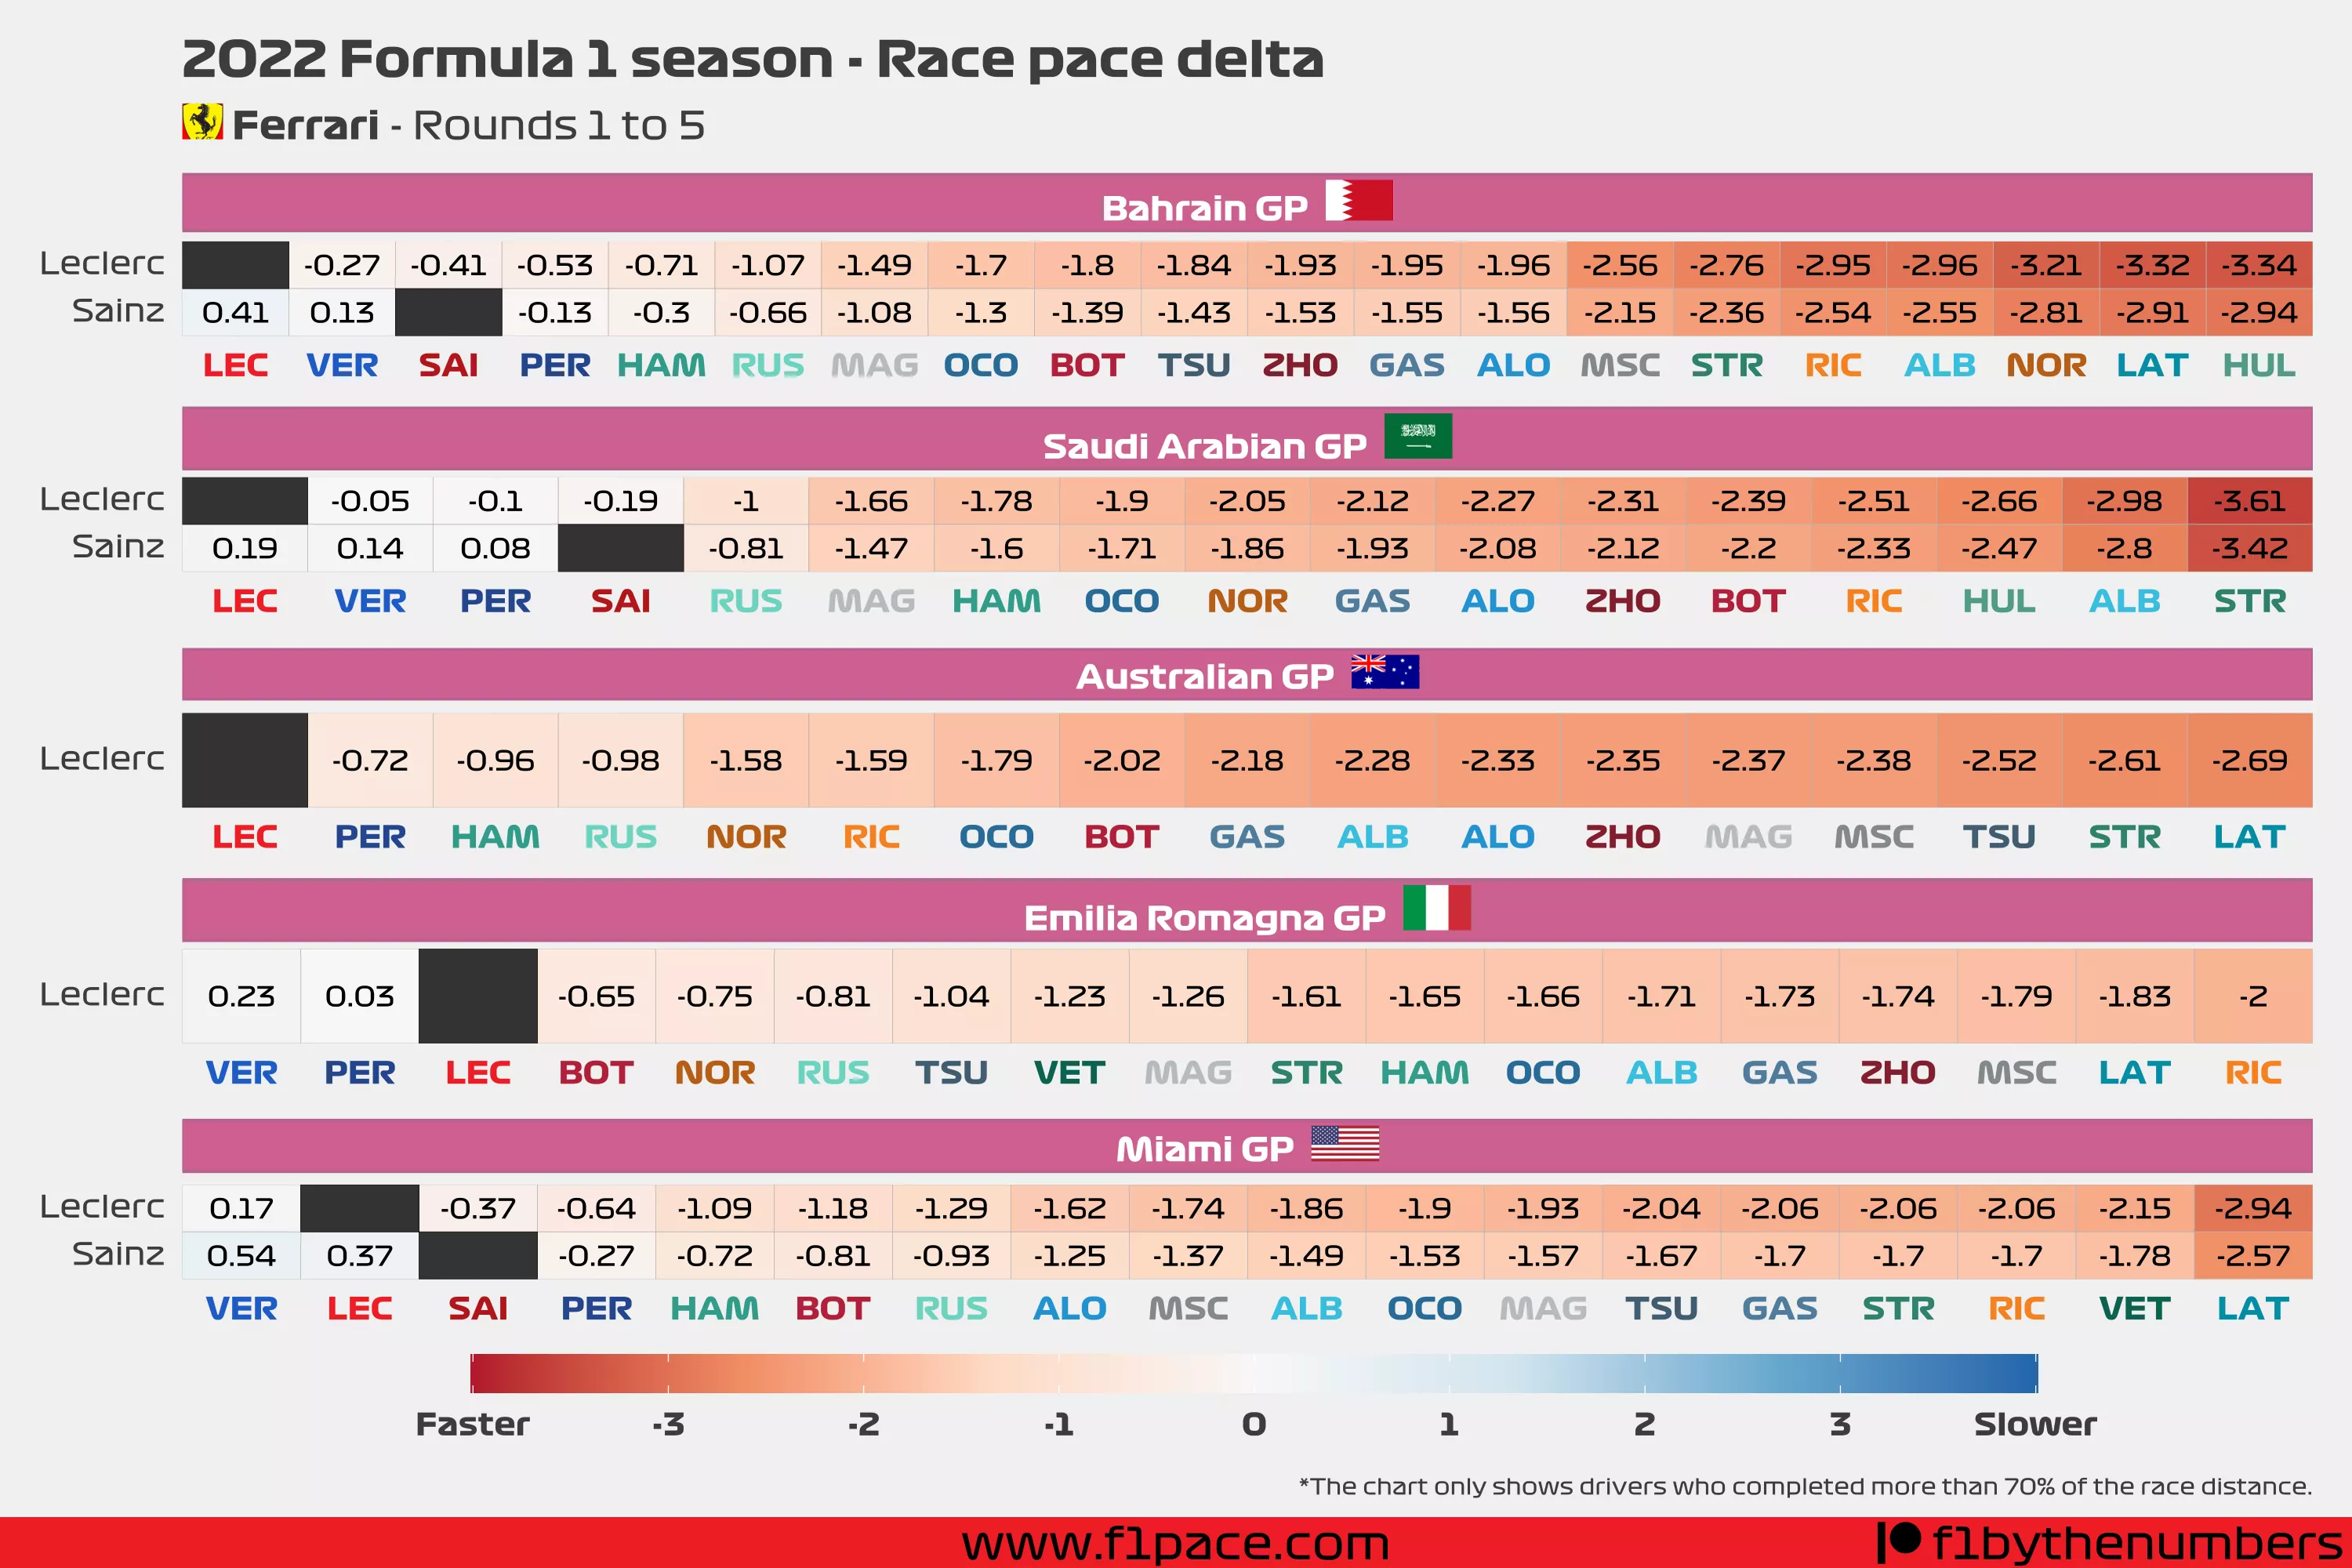 Race pace delta: Rounds to 1 to 5 - Ferrari